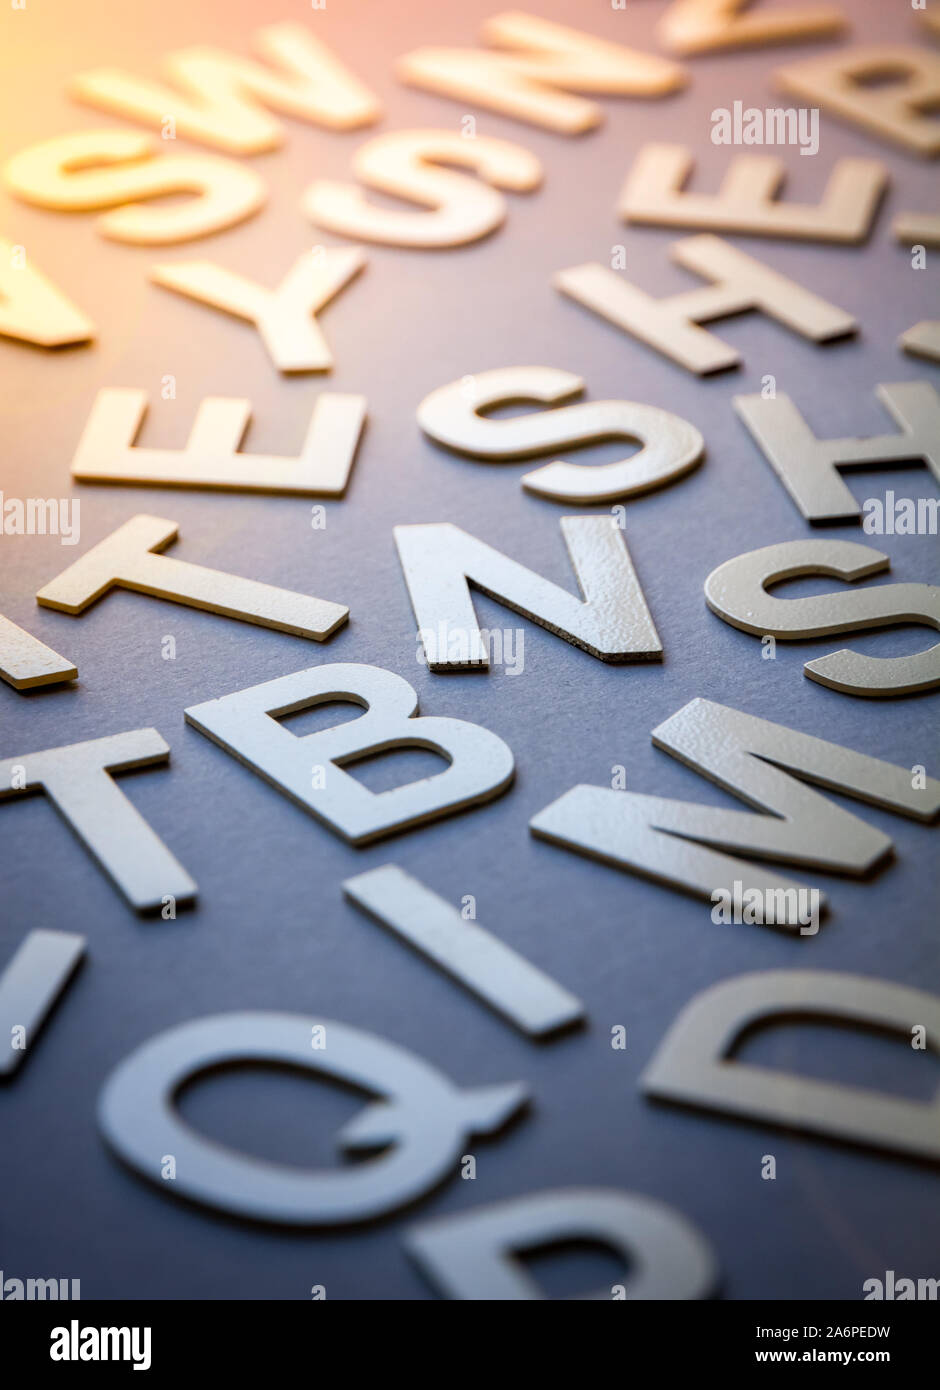 Mixed solid letters pile closeup photo. Education background concept Stock Photo